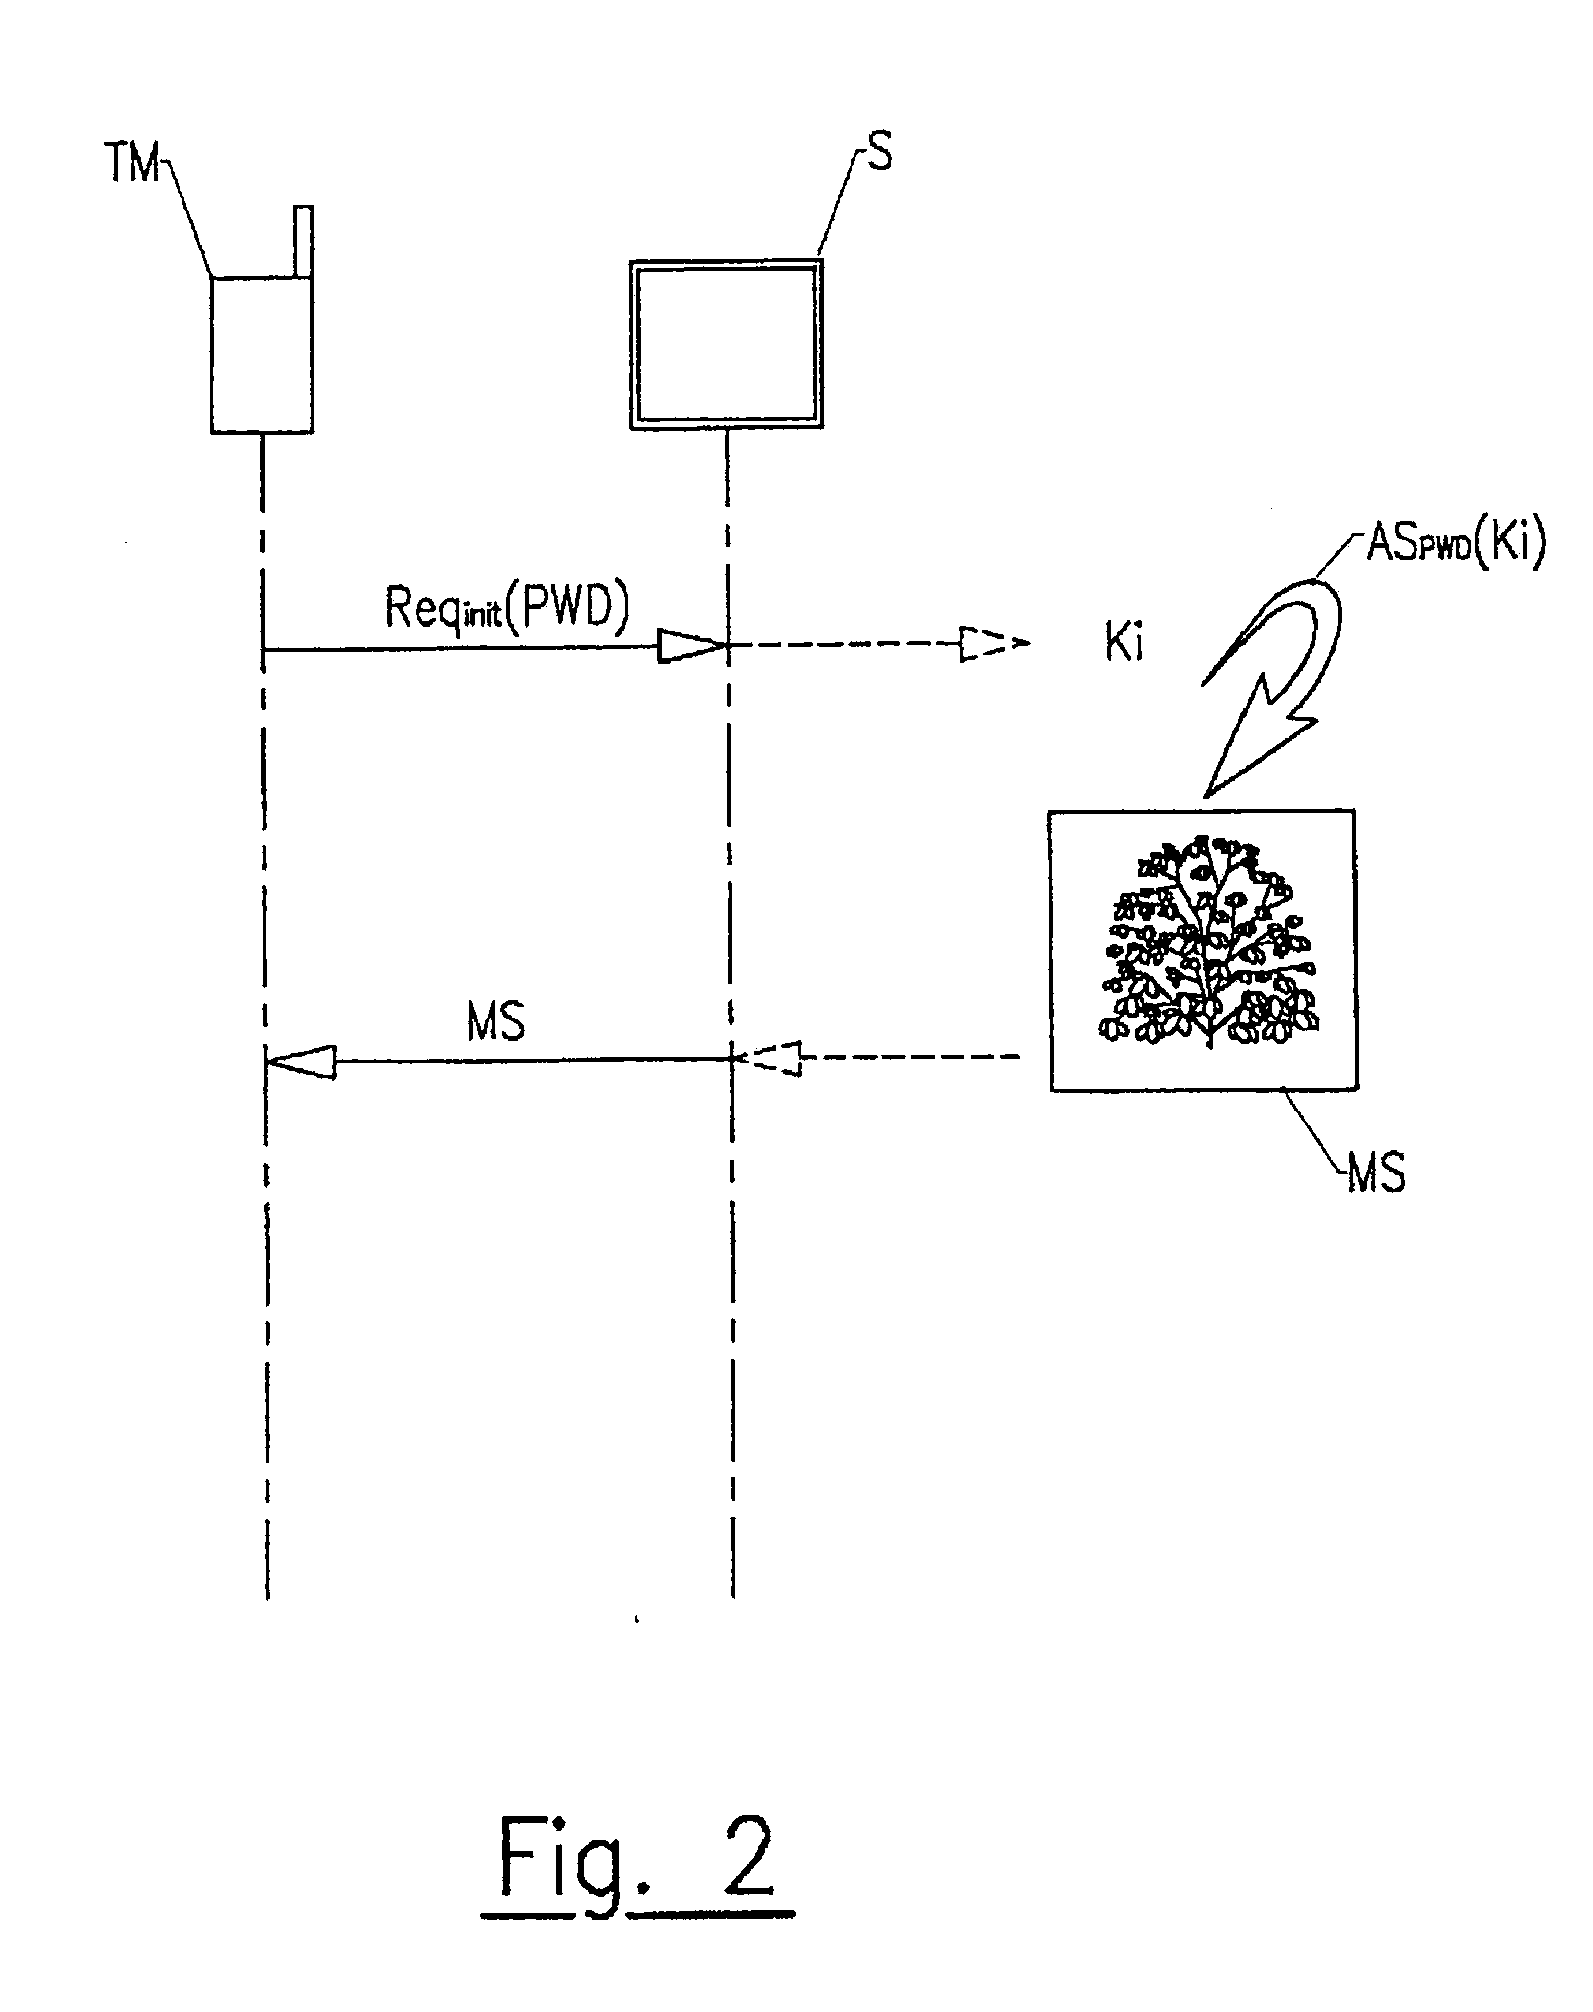 Method for authenticating a clent mobile terminal with a remote server